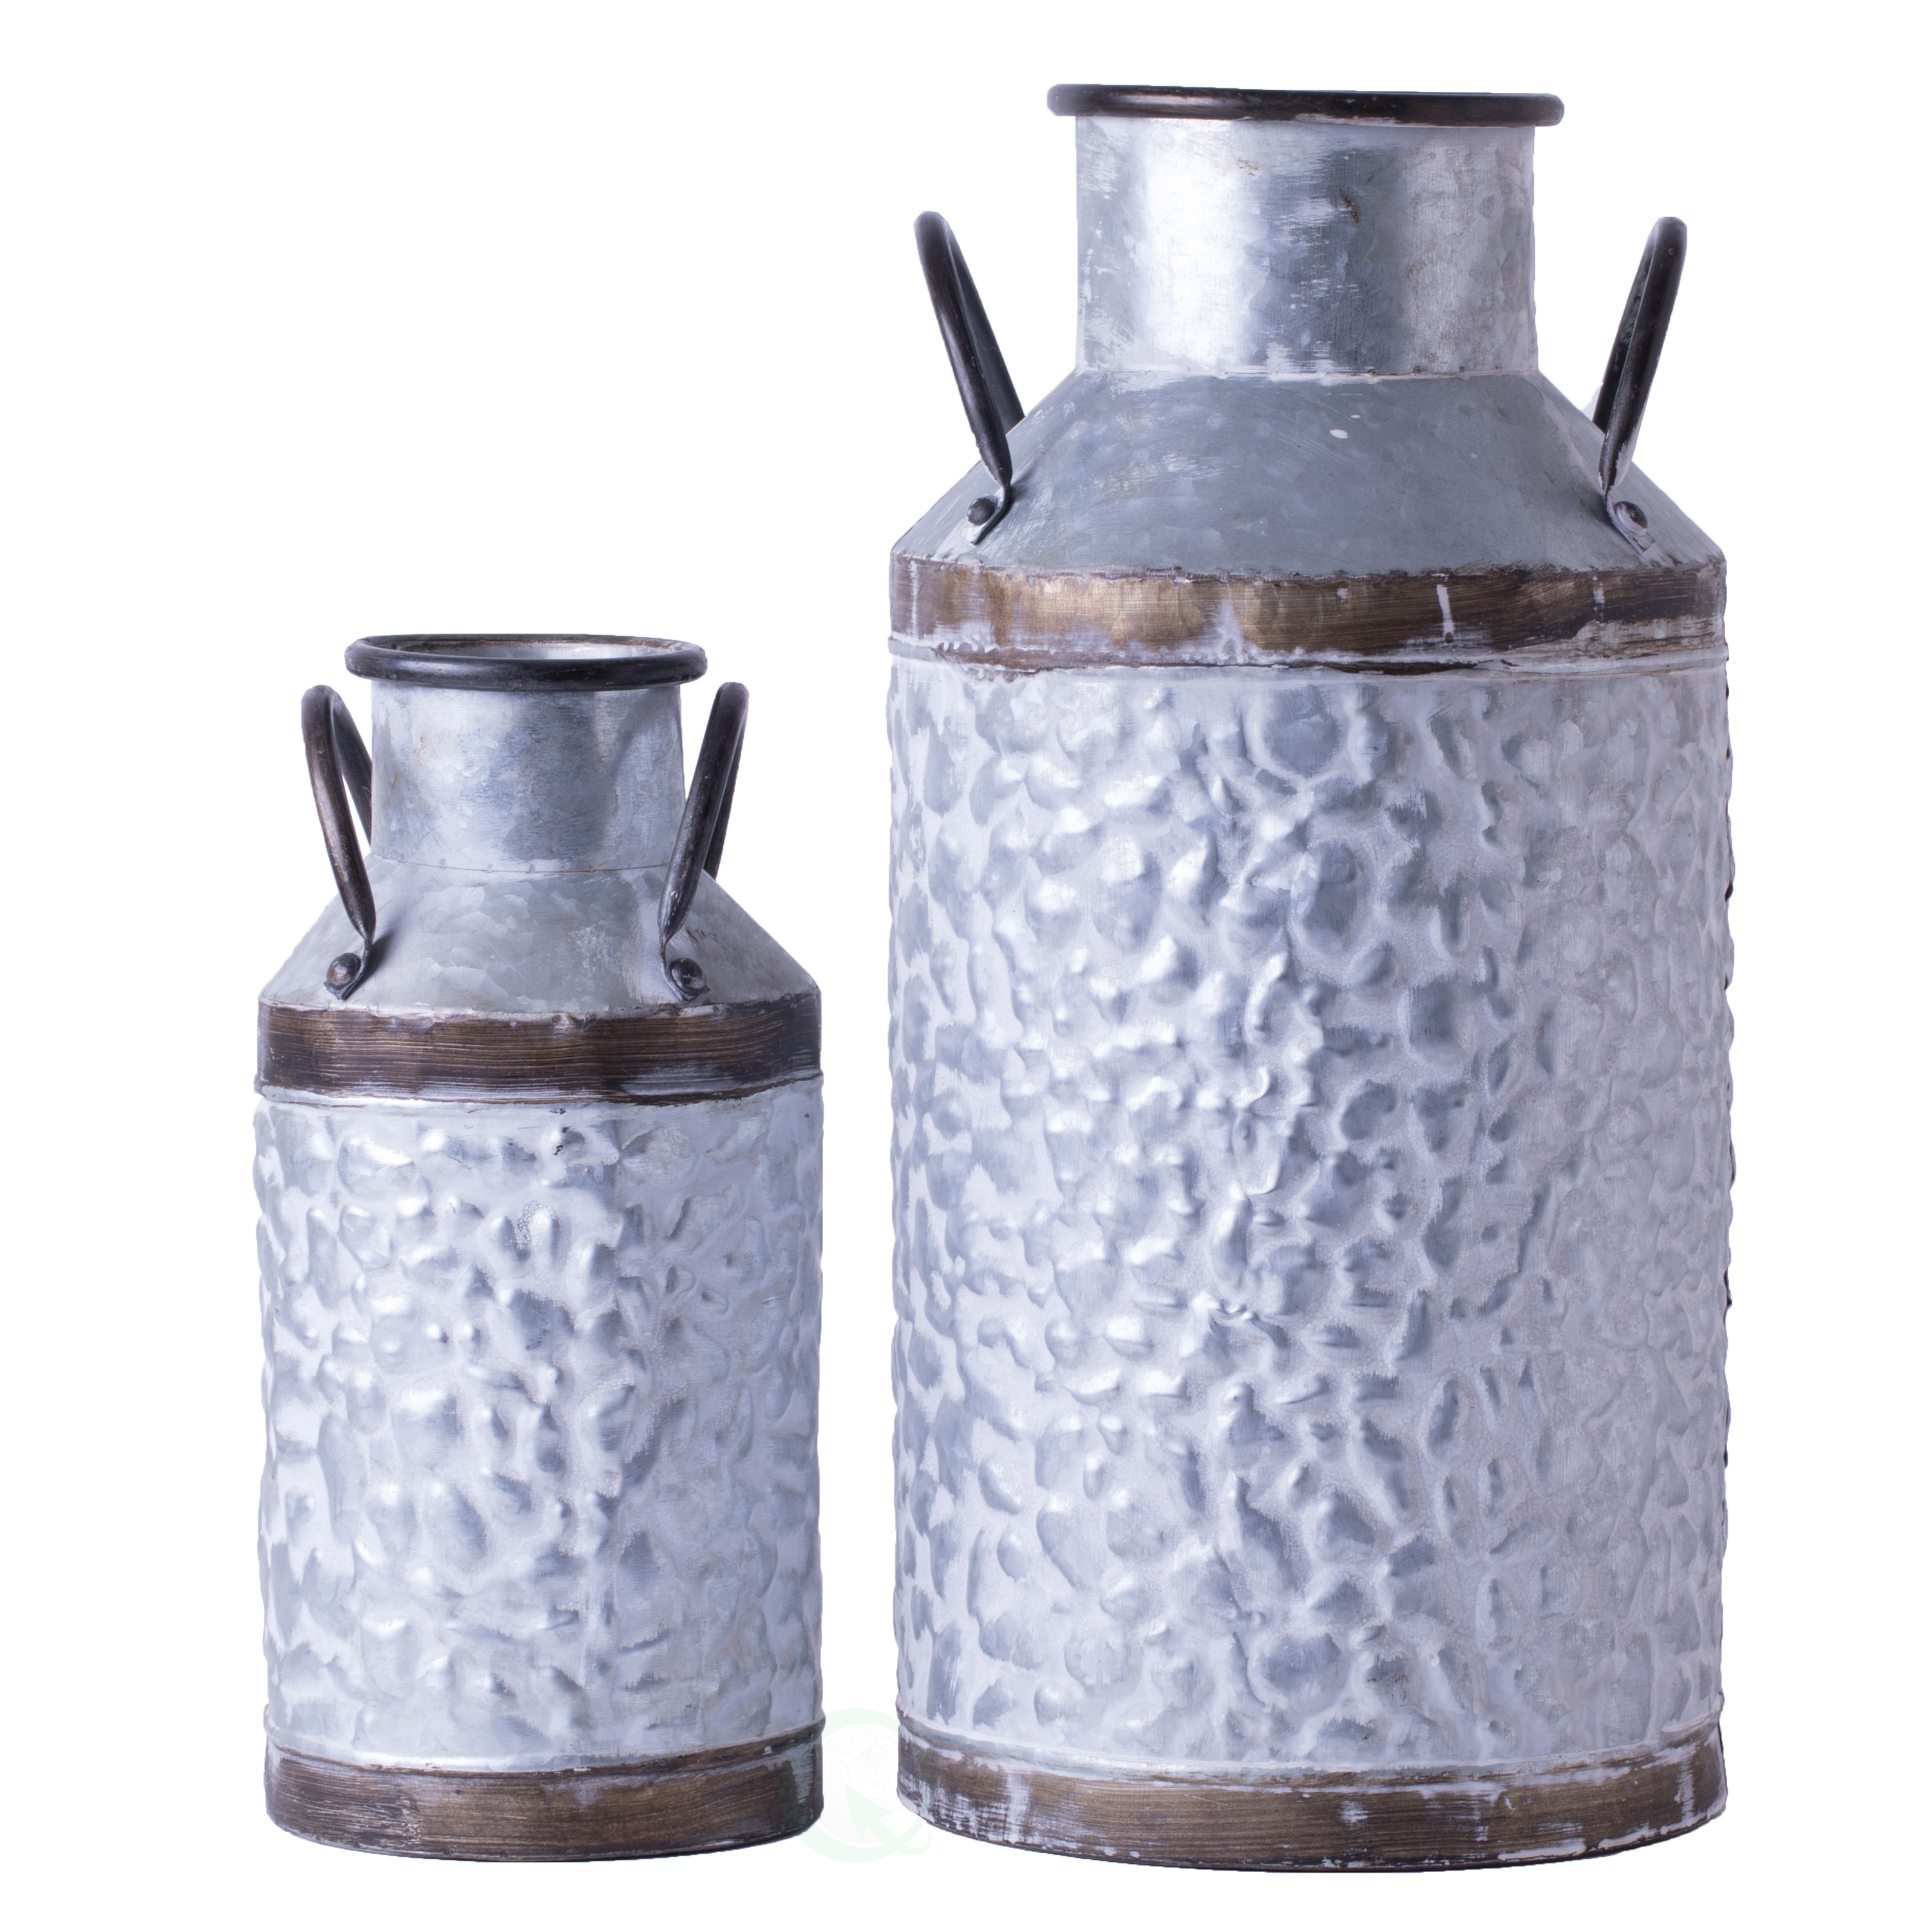 Rustic Farmhouse Style Galvanized Metal Milk Can Decoration Planter And Vase, - Small